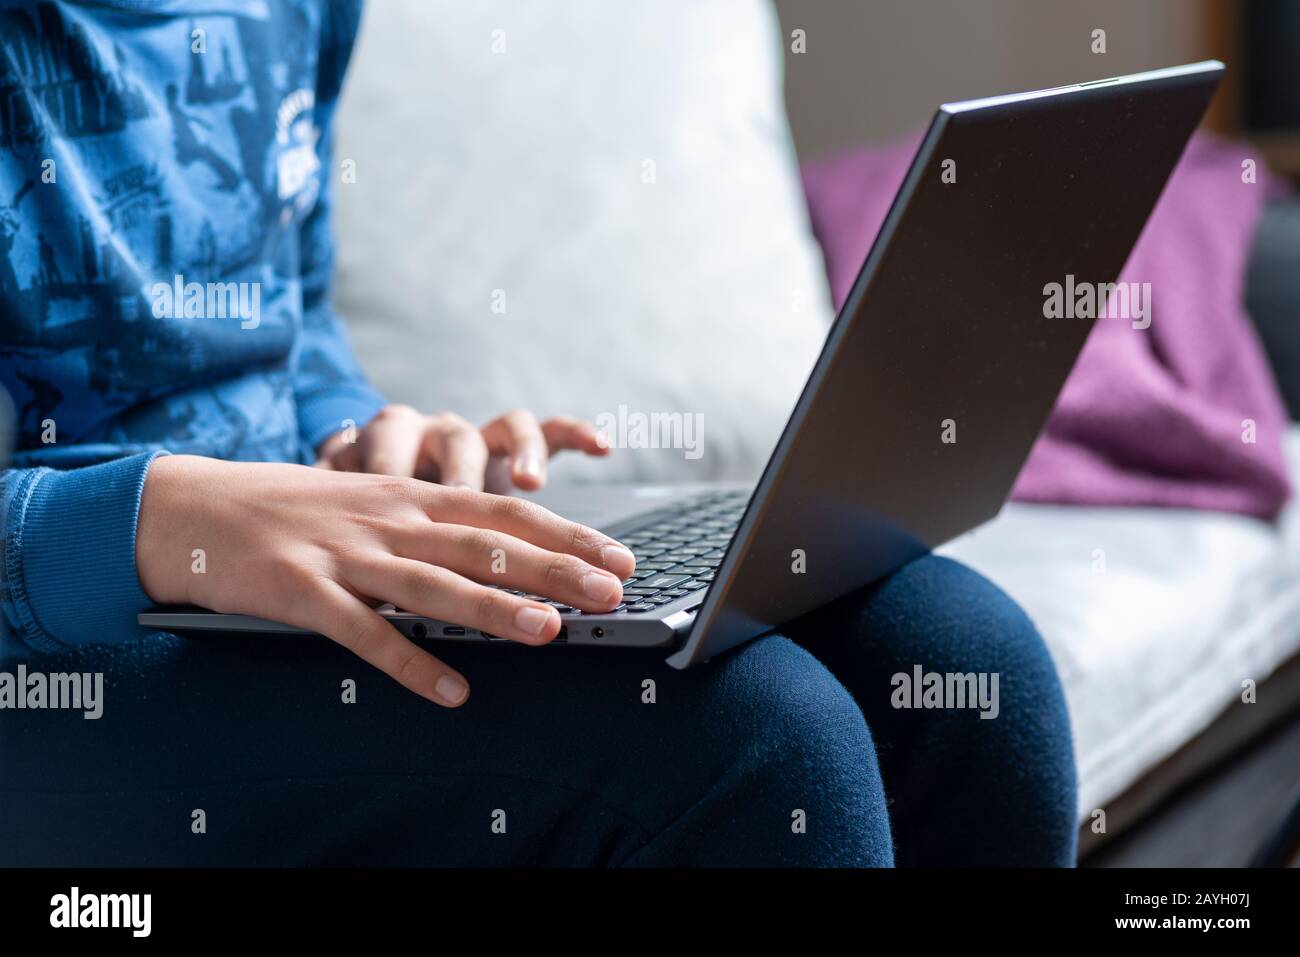 young boy watches videos online on laptop comuter Stock Photo